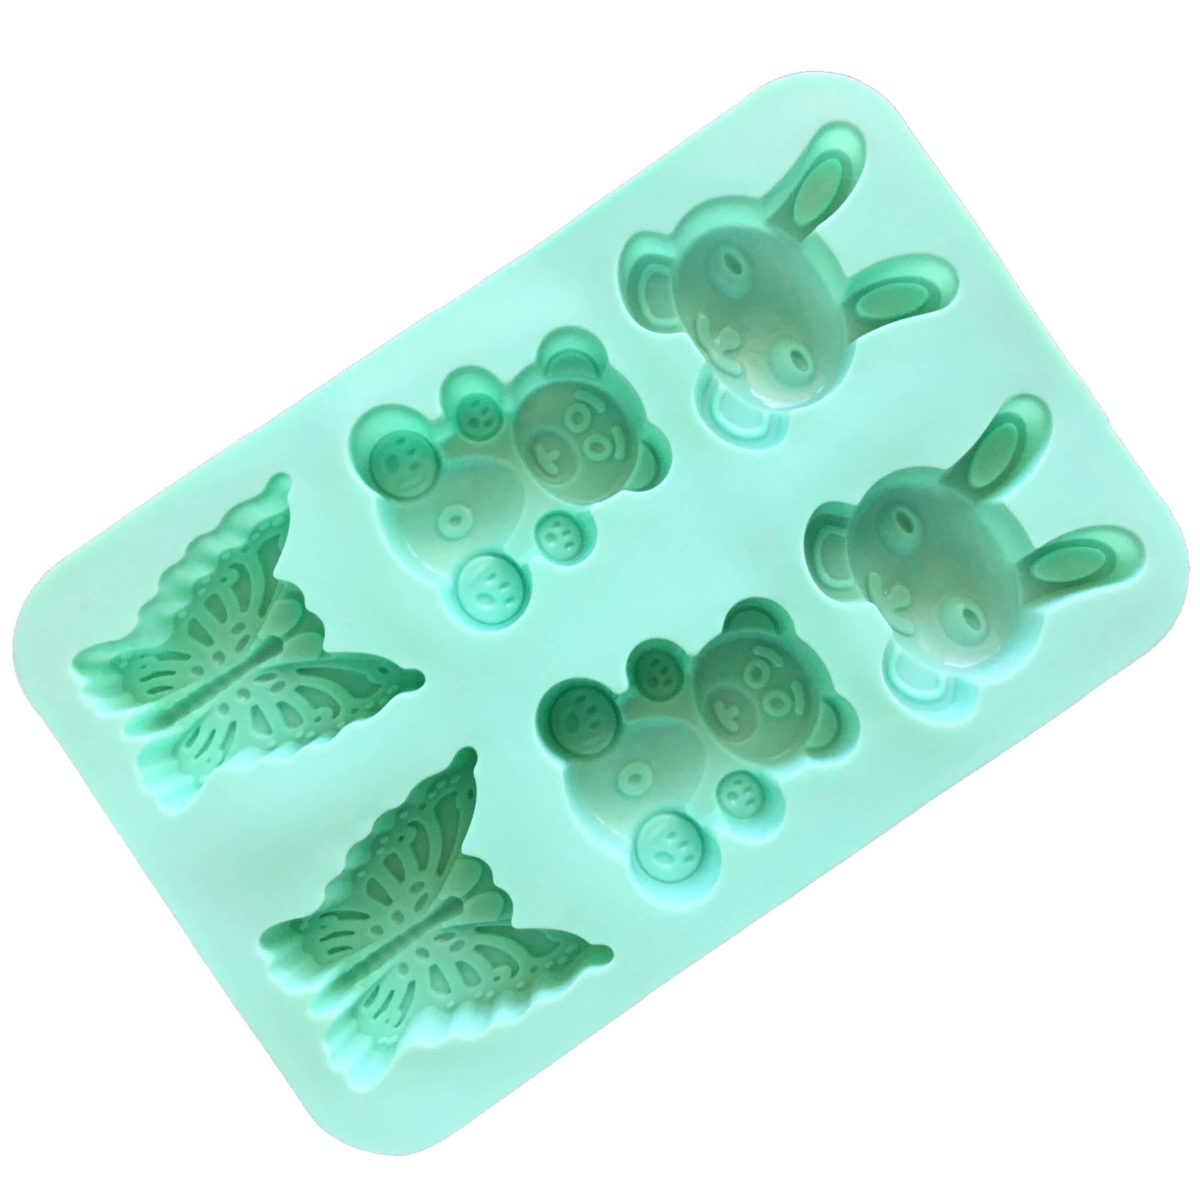 back of large aqua coloured silicone mould with six cavities - two each of bunny rabbit head, baby bear and butterfly